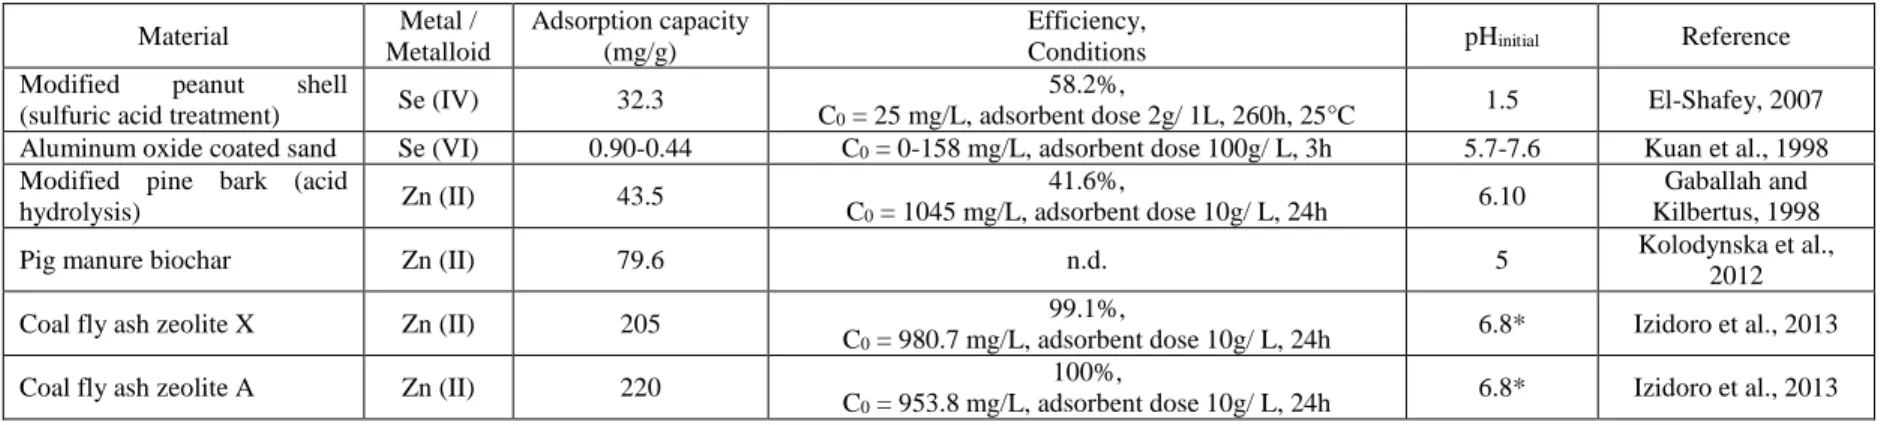 Tableau 2.2: Adsorption capacities and treatment efficiency for metals and metalloids of several modified materials (continued)  Material  Metal /  Metalloid  Adsorption capacity (mg/g)  Efficiency,  